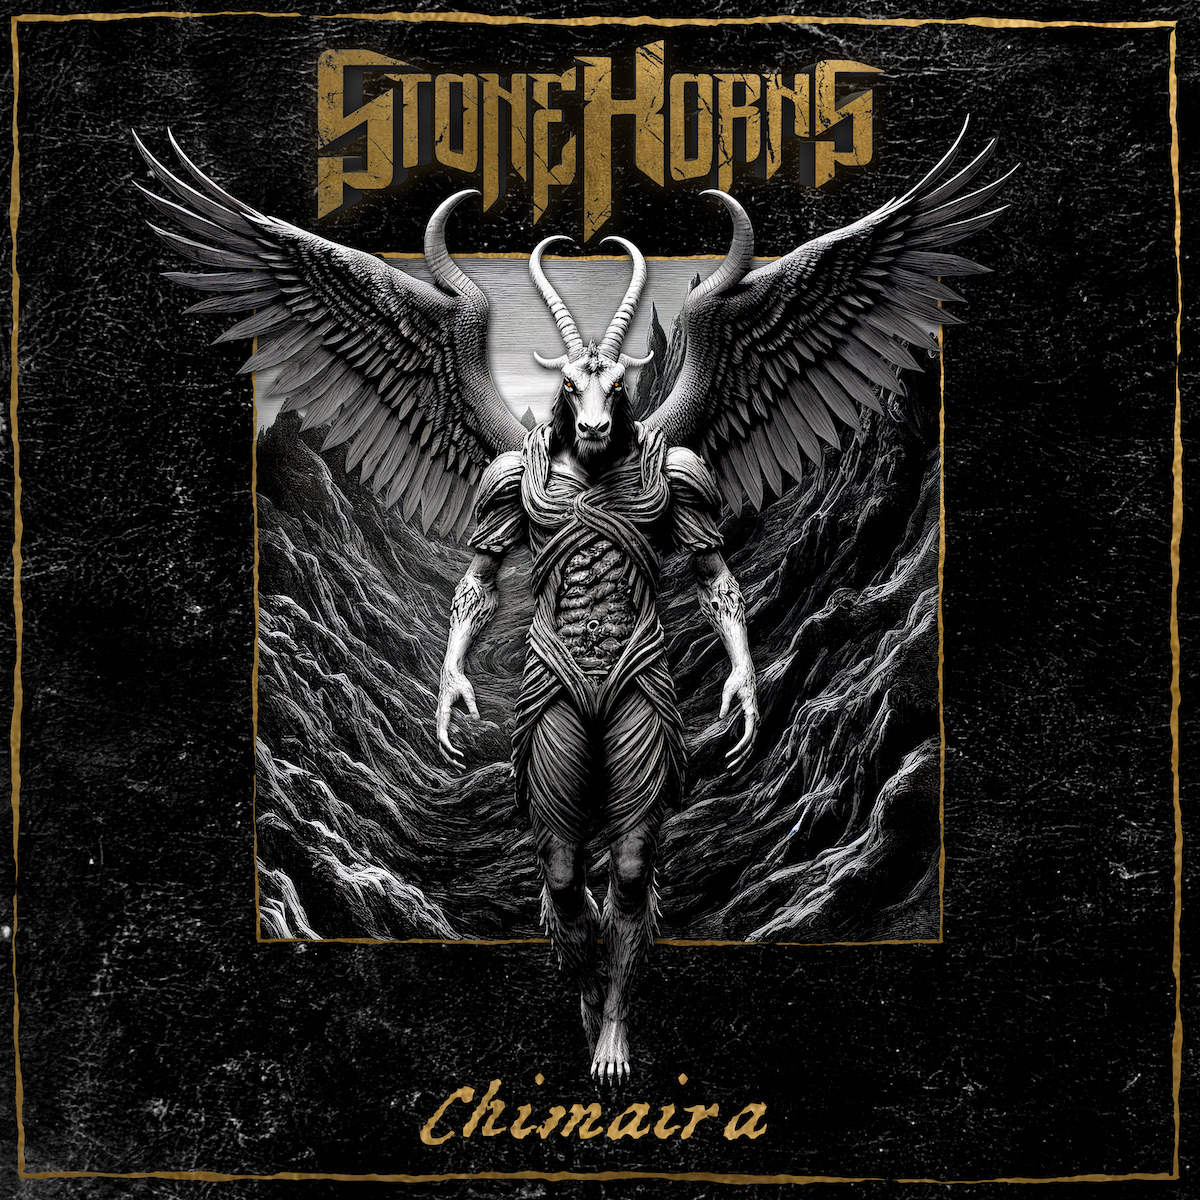 ALBUM REVIEW: Chimaira by Stone Horns